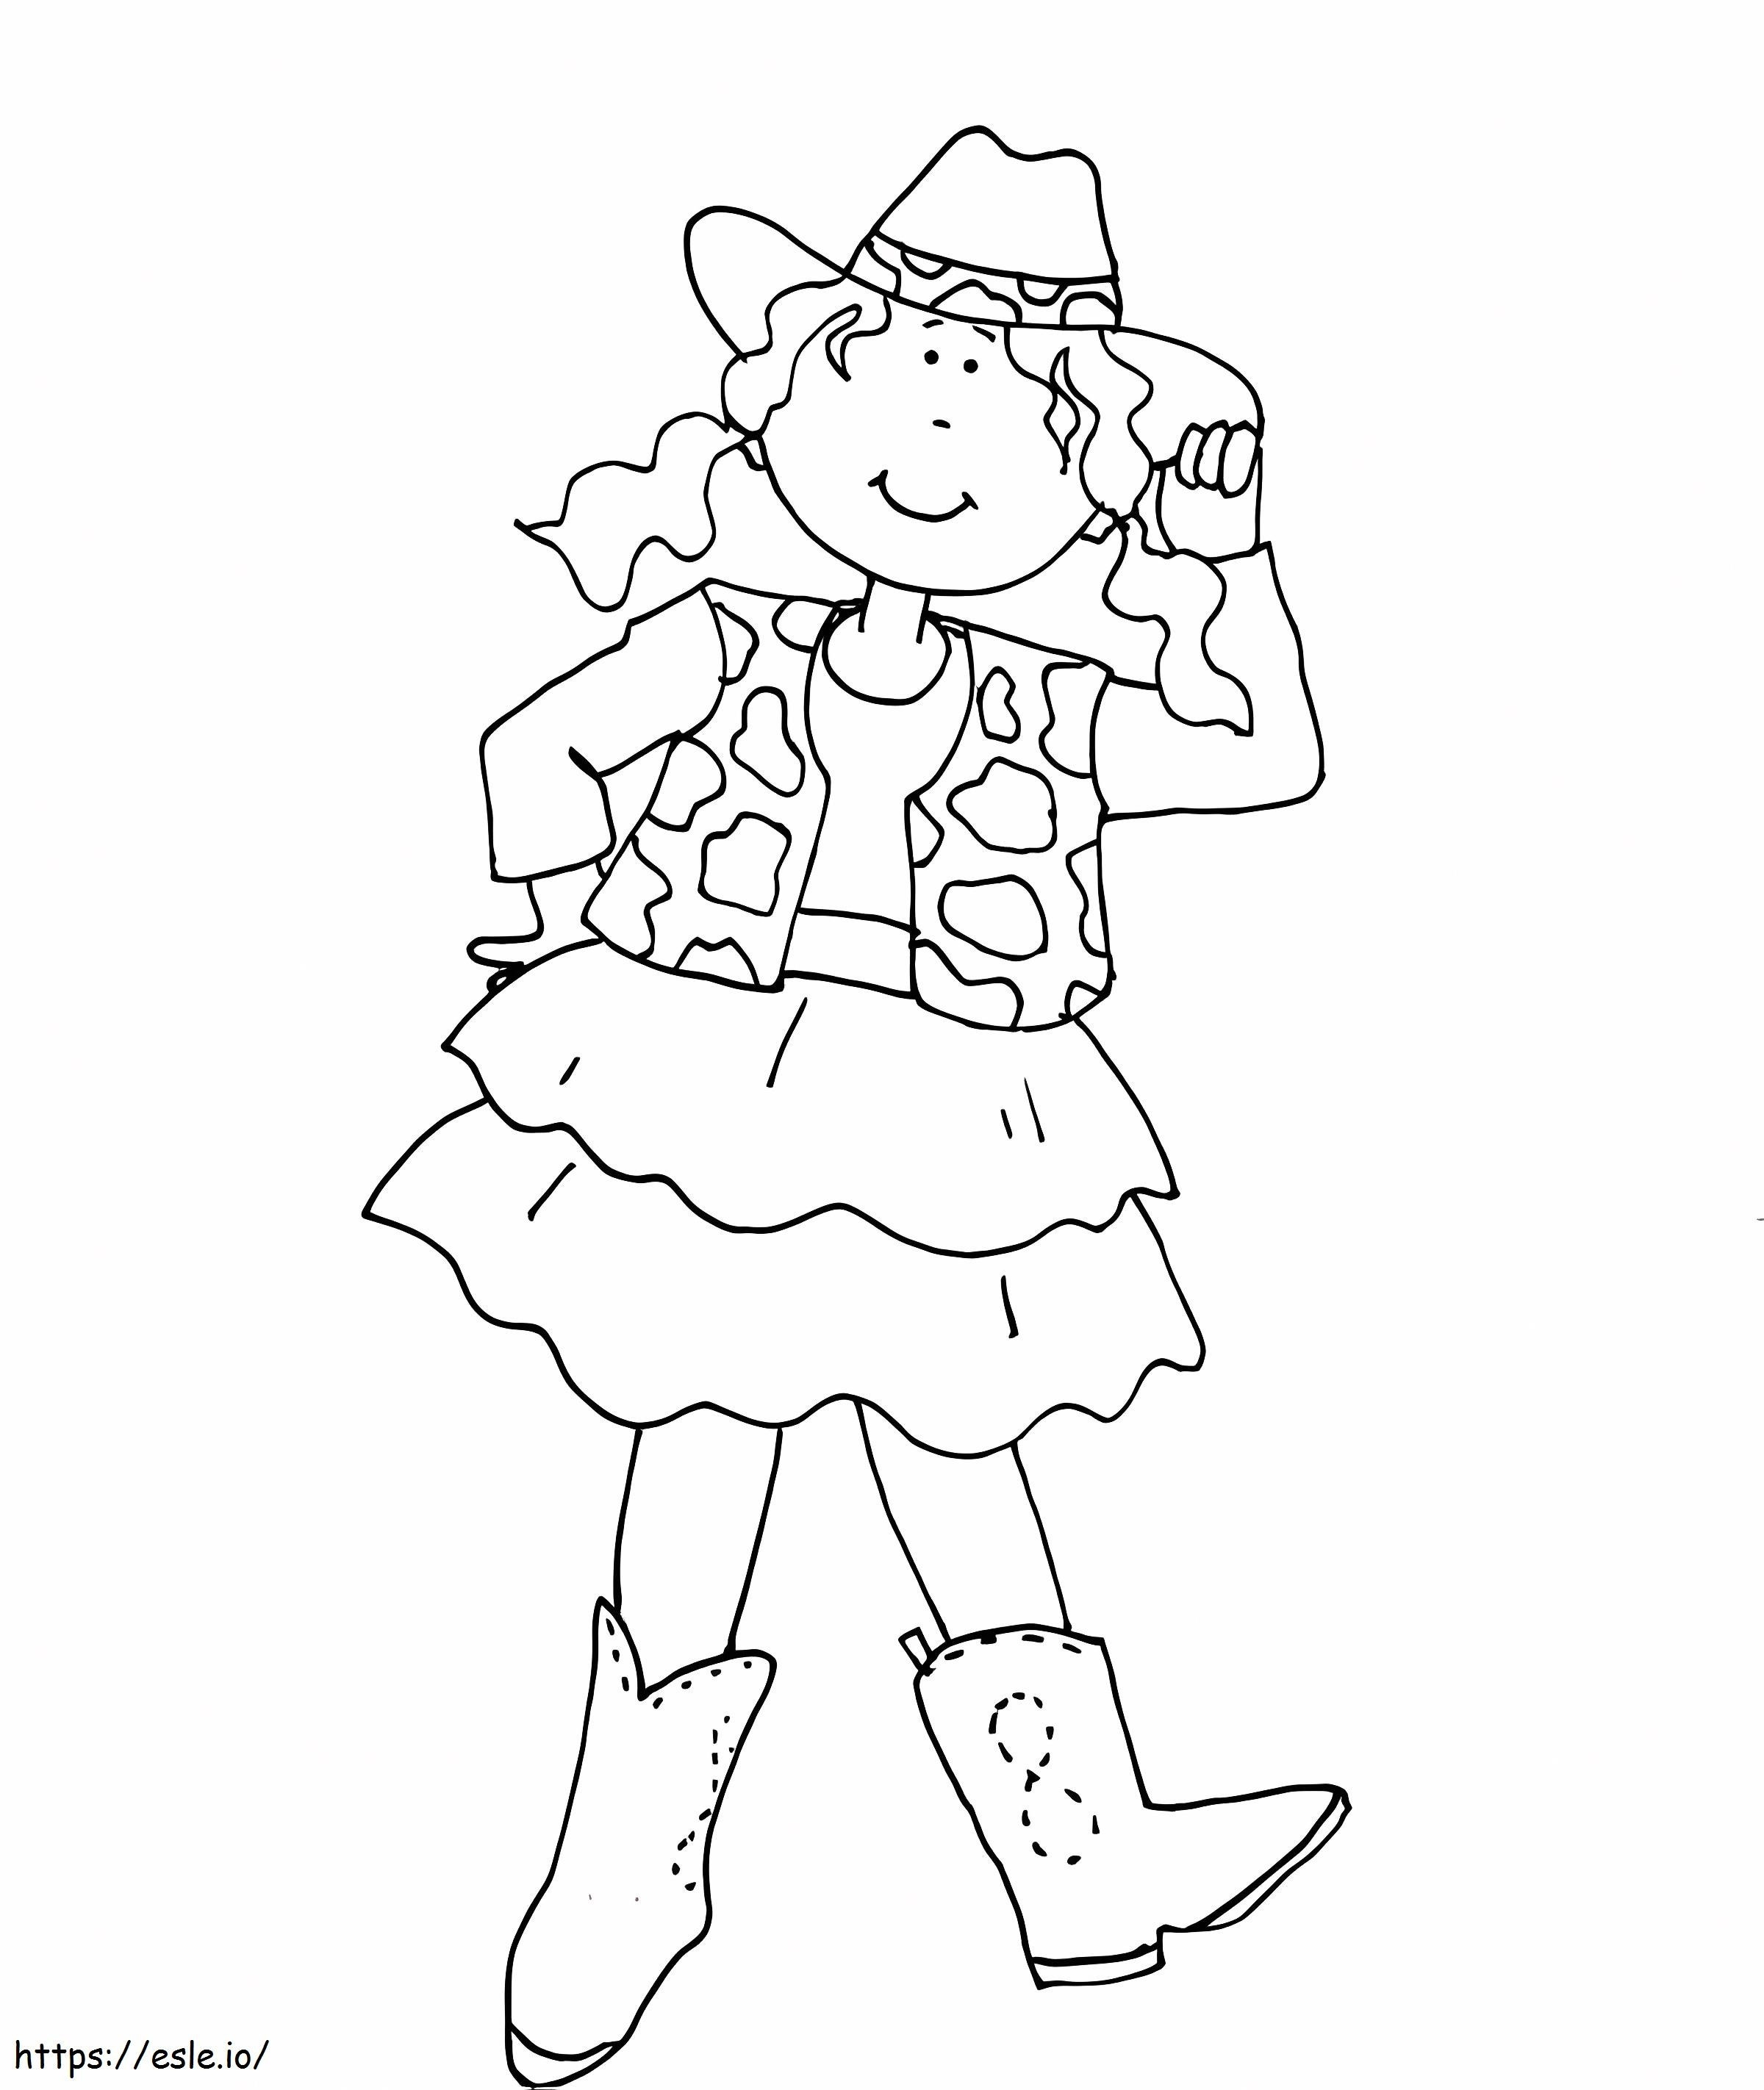 Cartoon Cowgirl coloring page